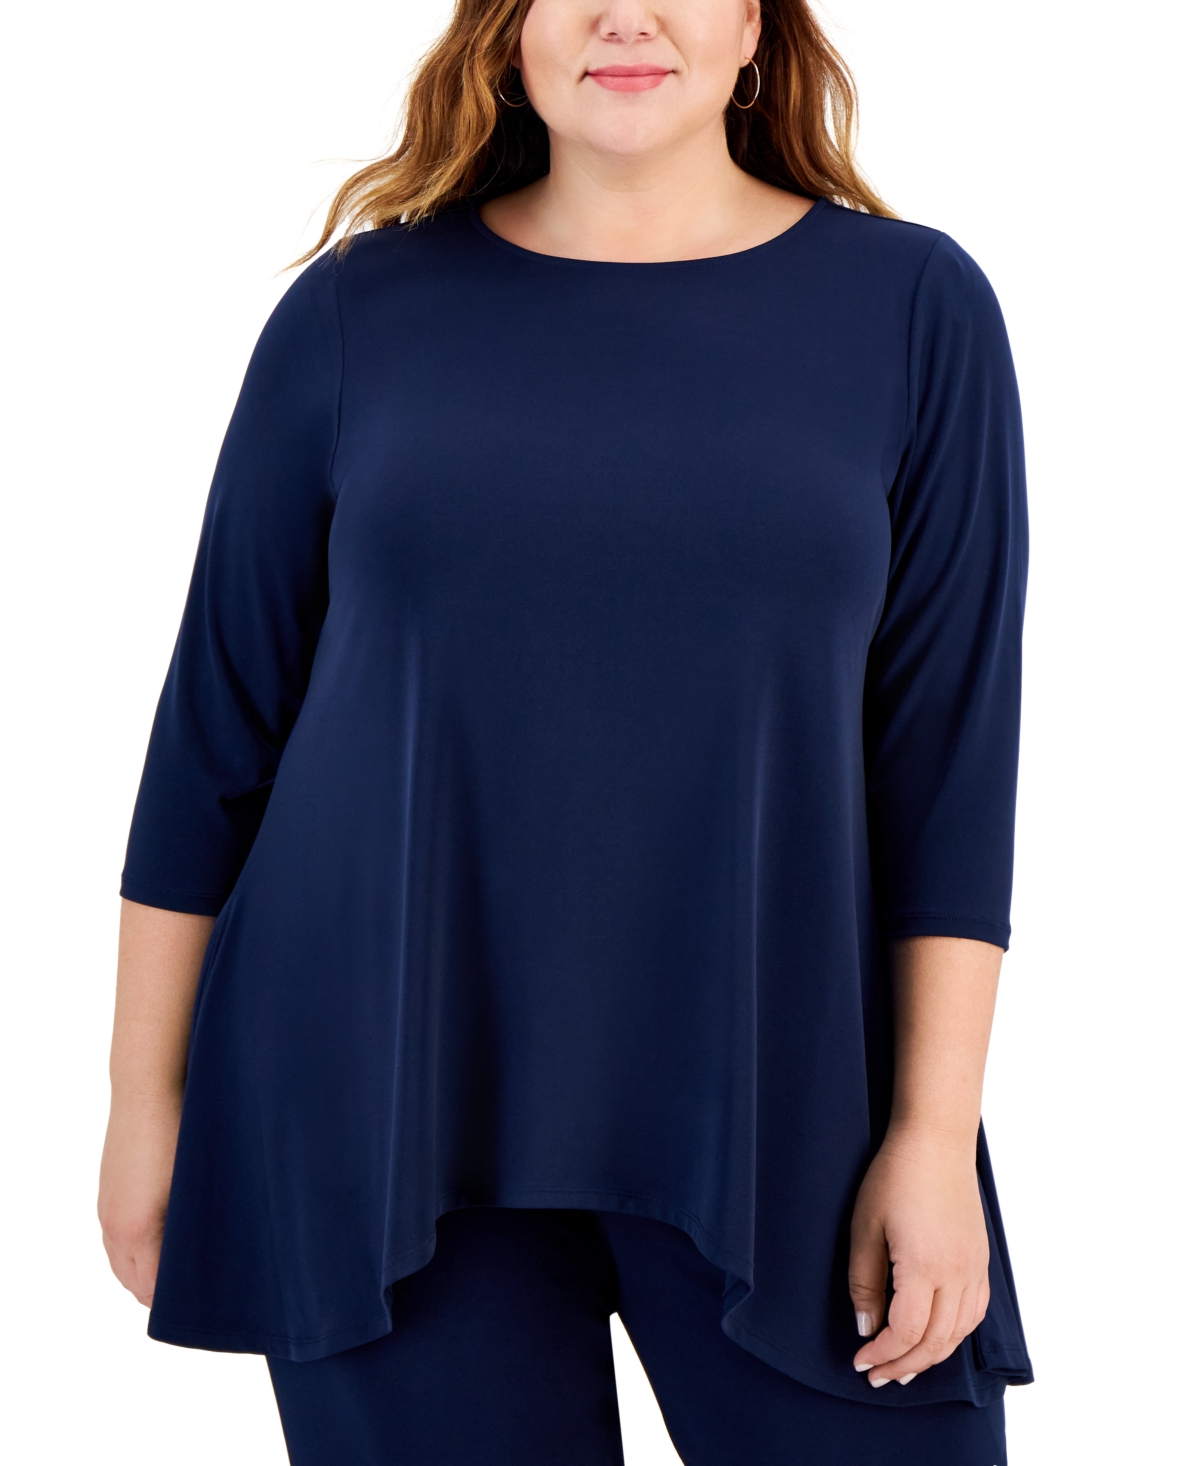 JM COLLECTION PLUS SIZE SOLID SWING TOP, CREATED FOR MACY'S